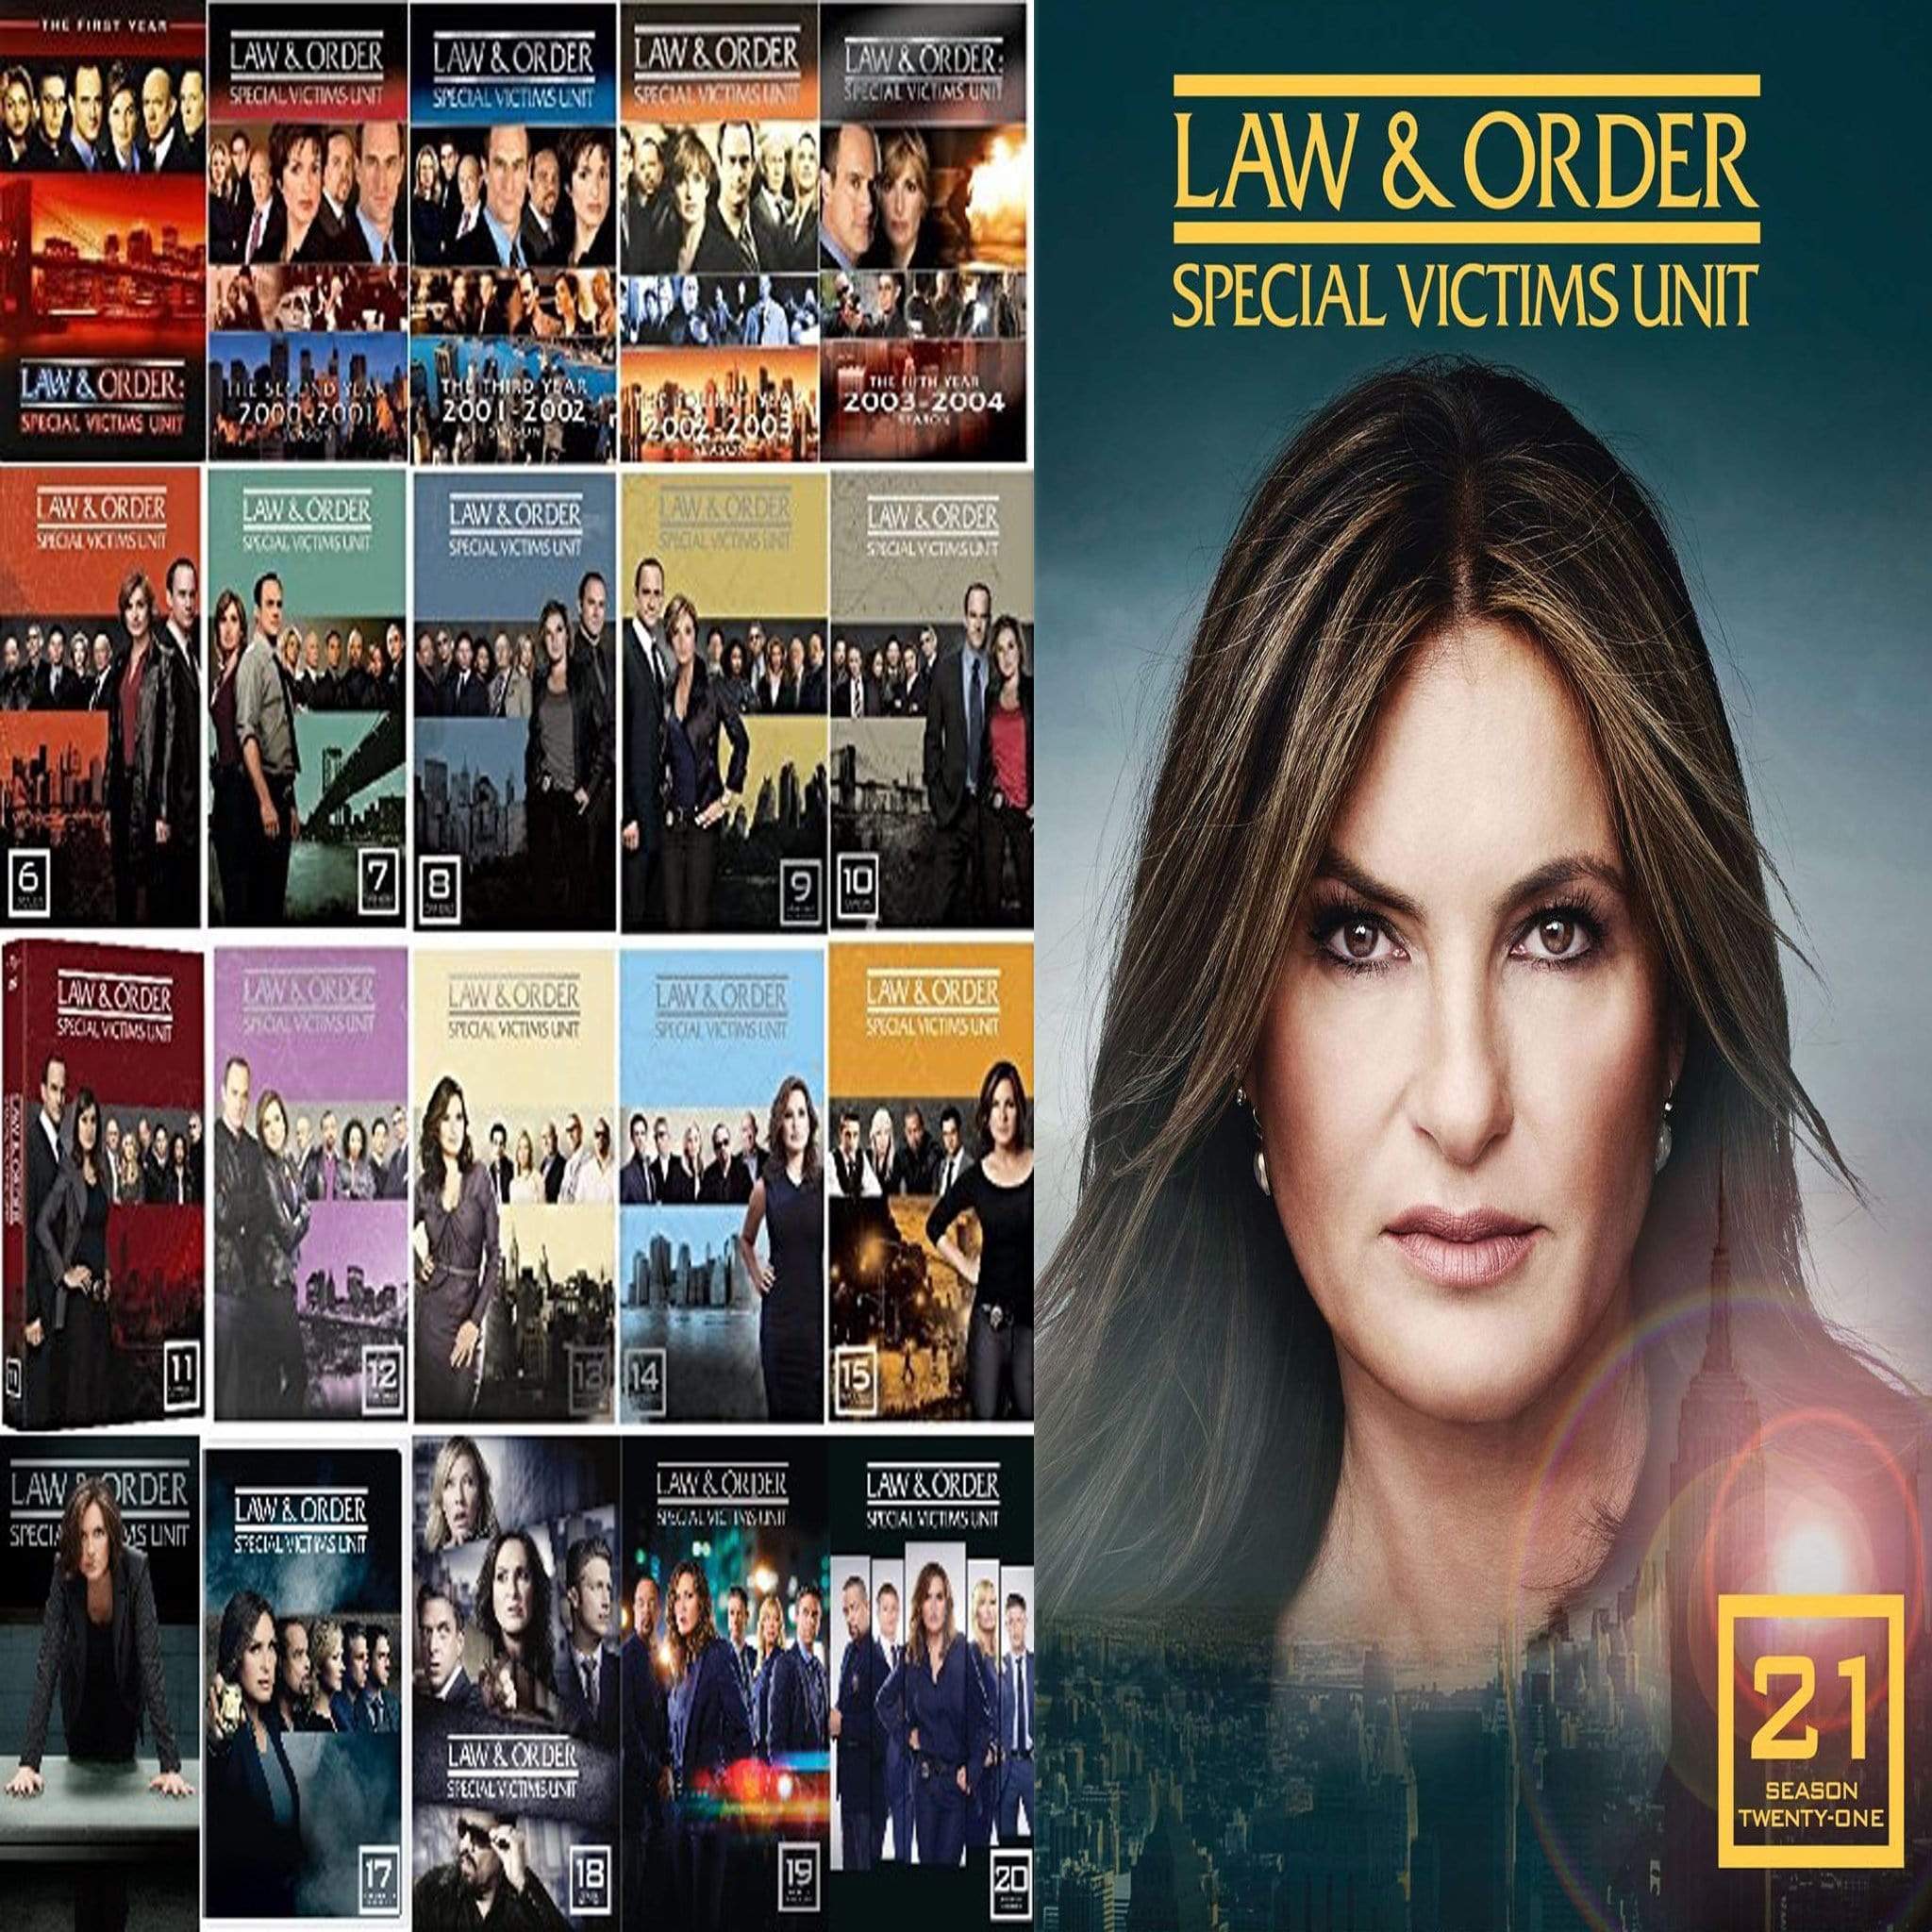 Law & Order Special Victims Unit Seasons 1-21 On DVD